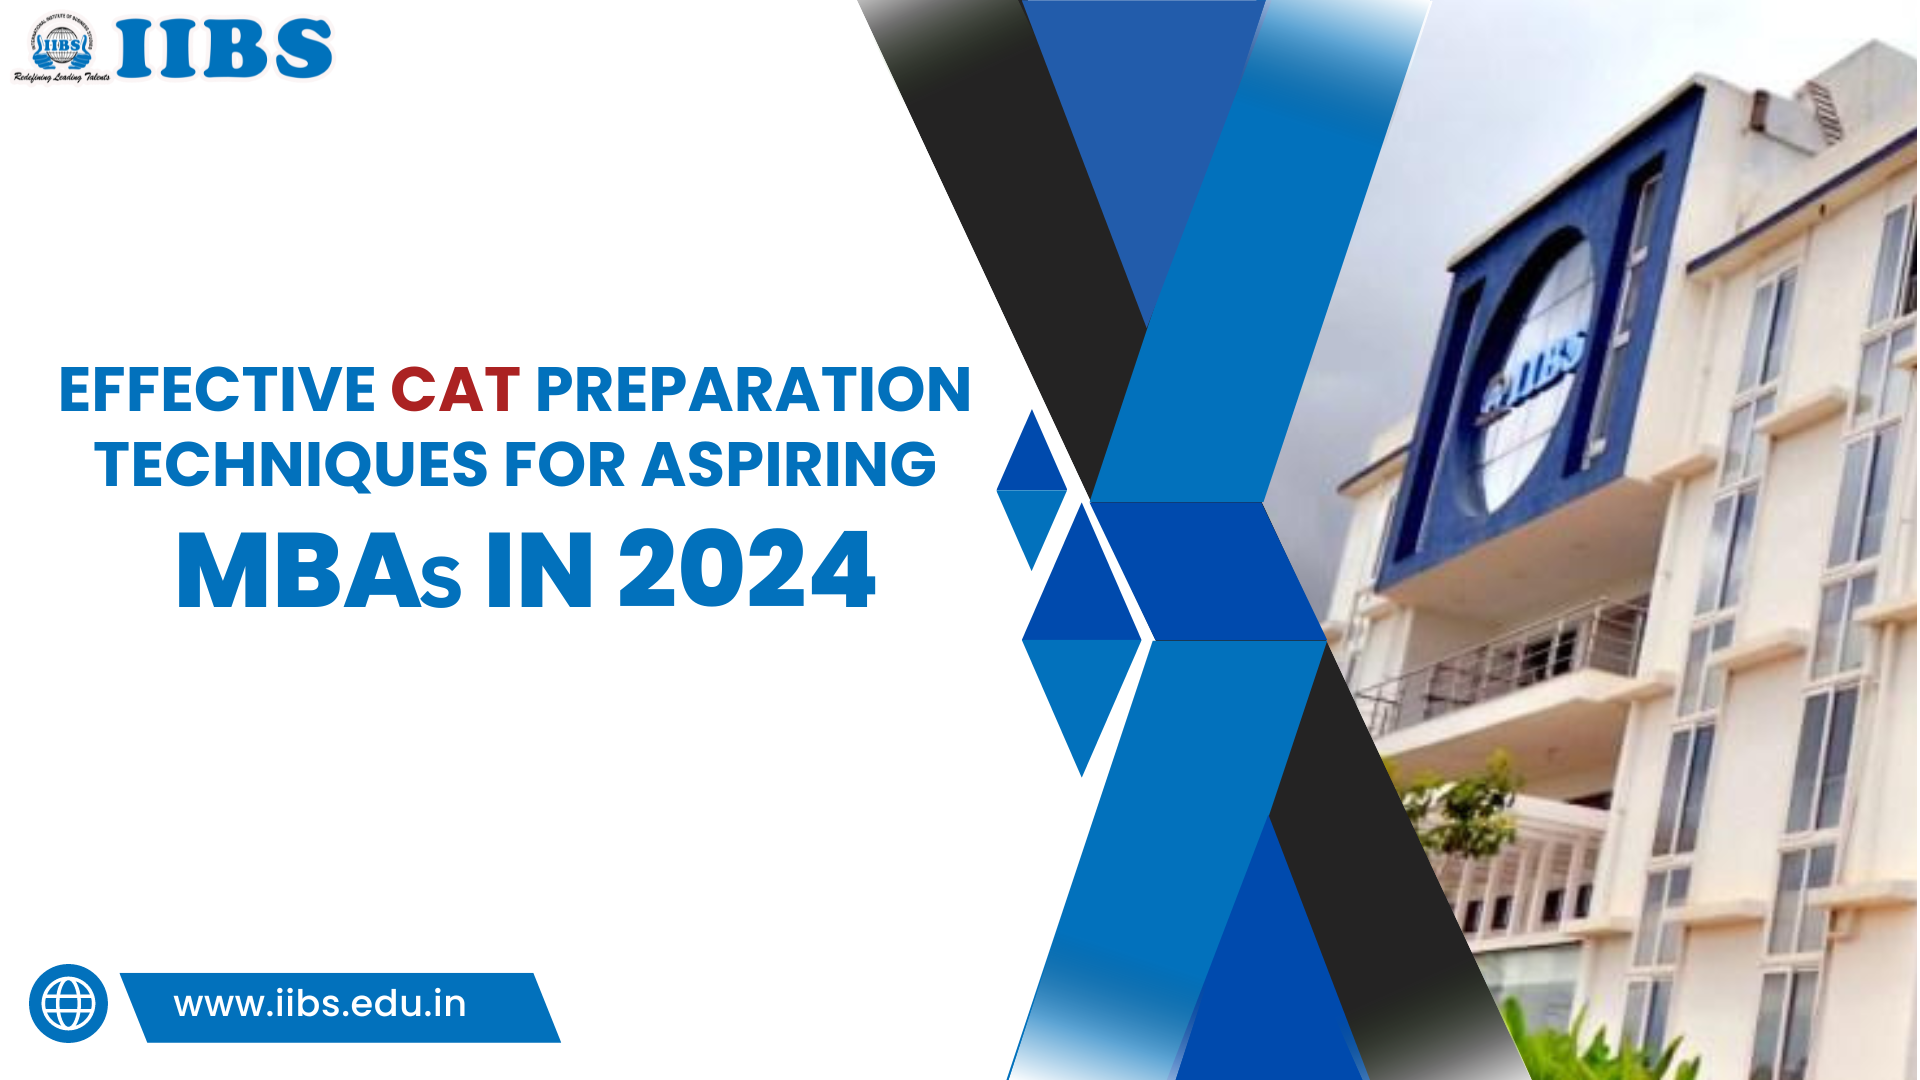 Effective CAT Preparation Techniques for Aspiring MBAs in 2024